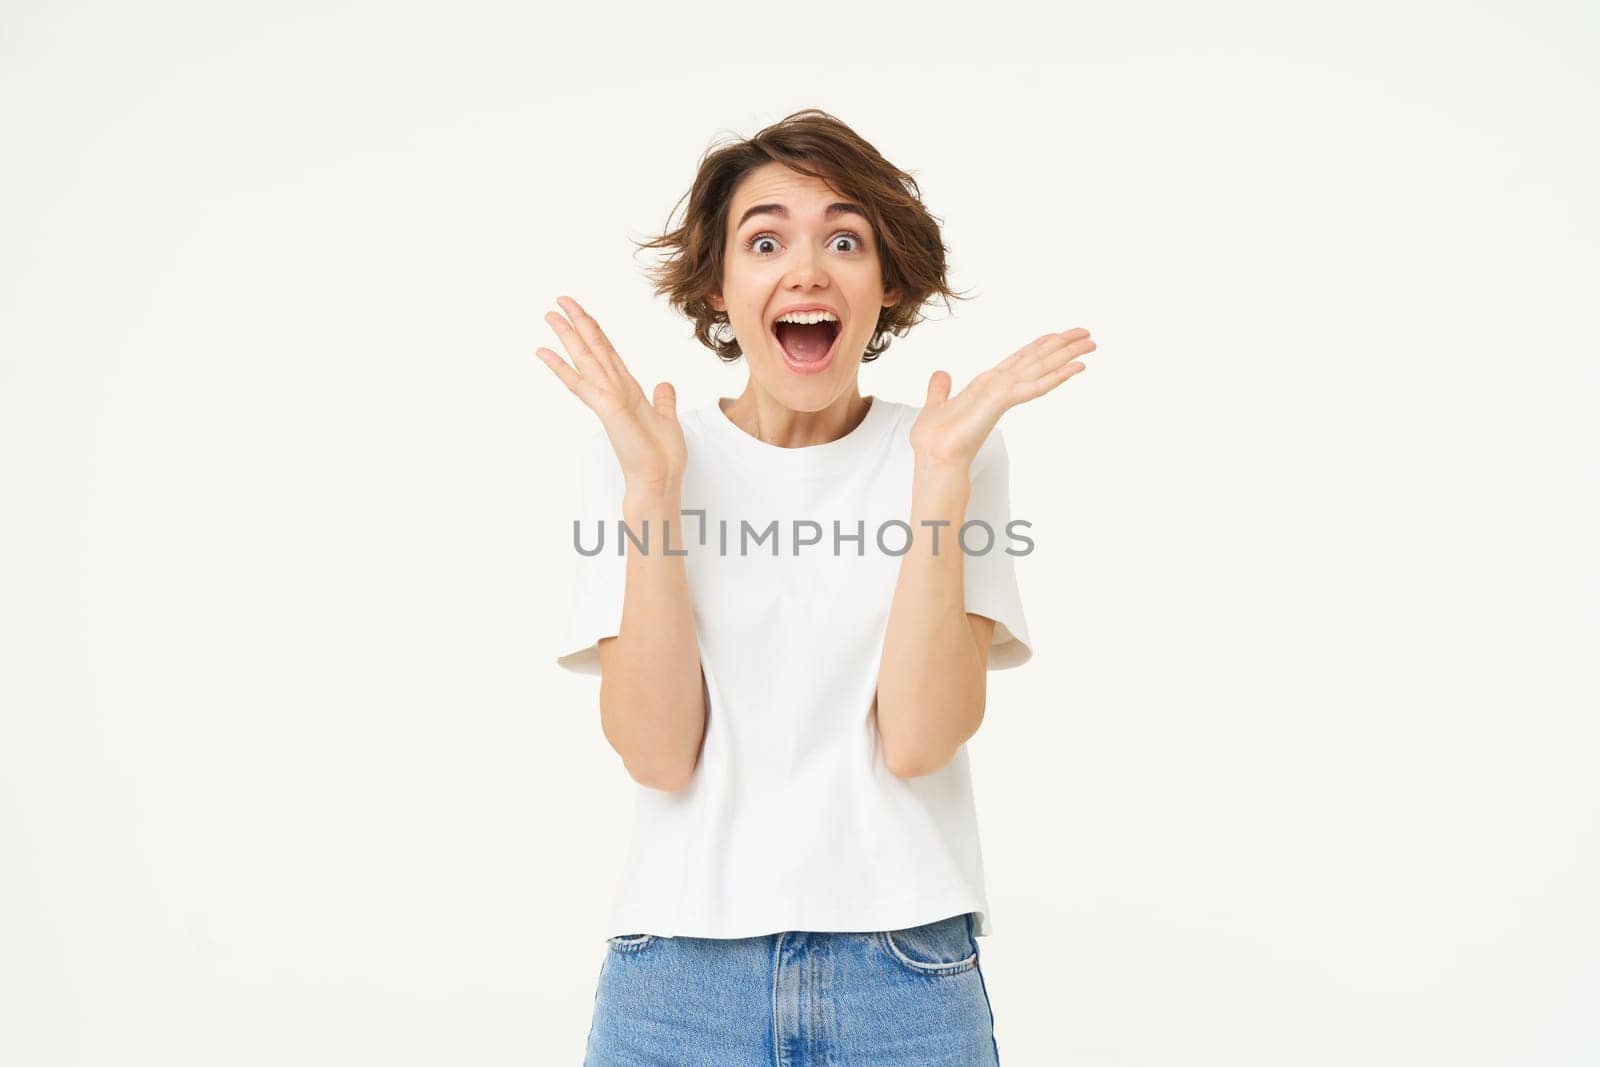 Image of woman with surprised face, amazed, says wow, claps hands and looks excited, stands over white background.